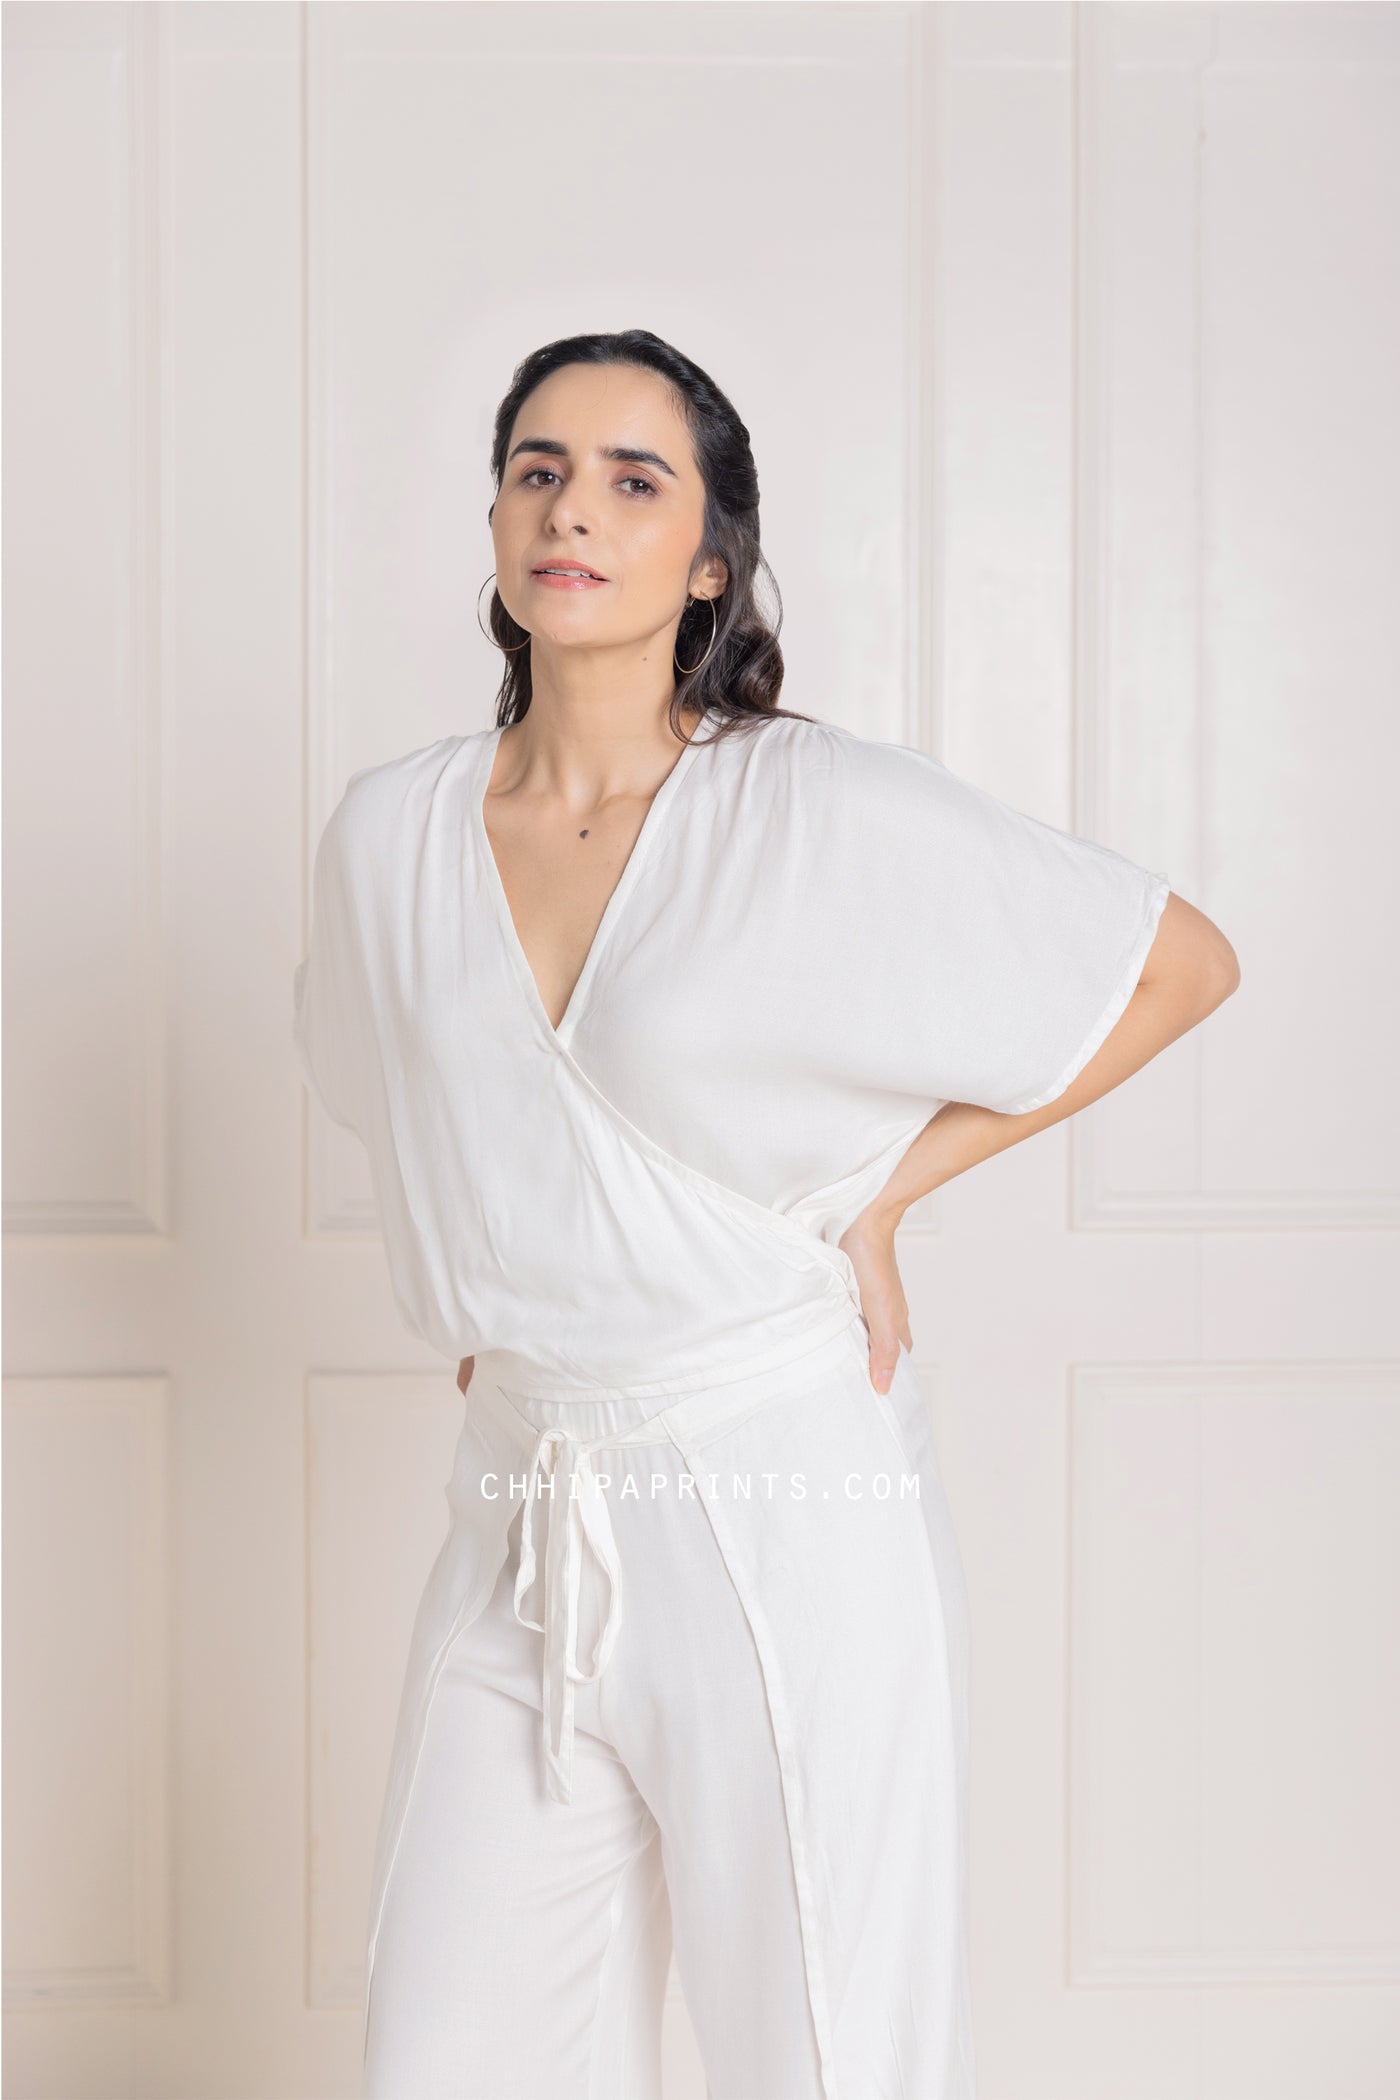 Cotton Modal Wrap Top and Pants Co Ord Set in Solid Shades of Off Whites